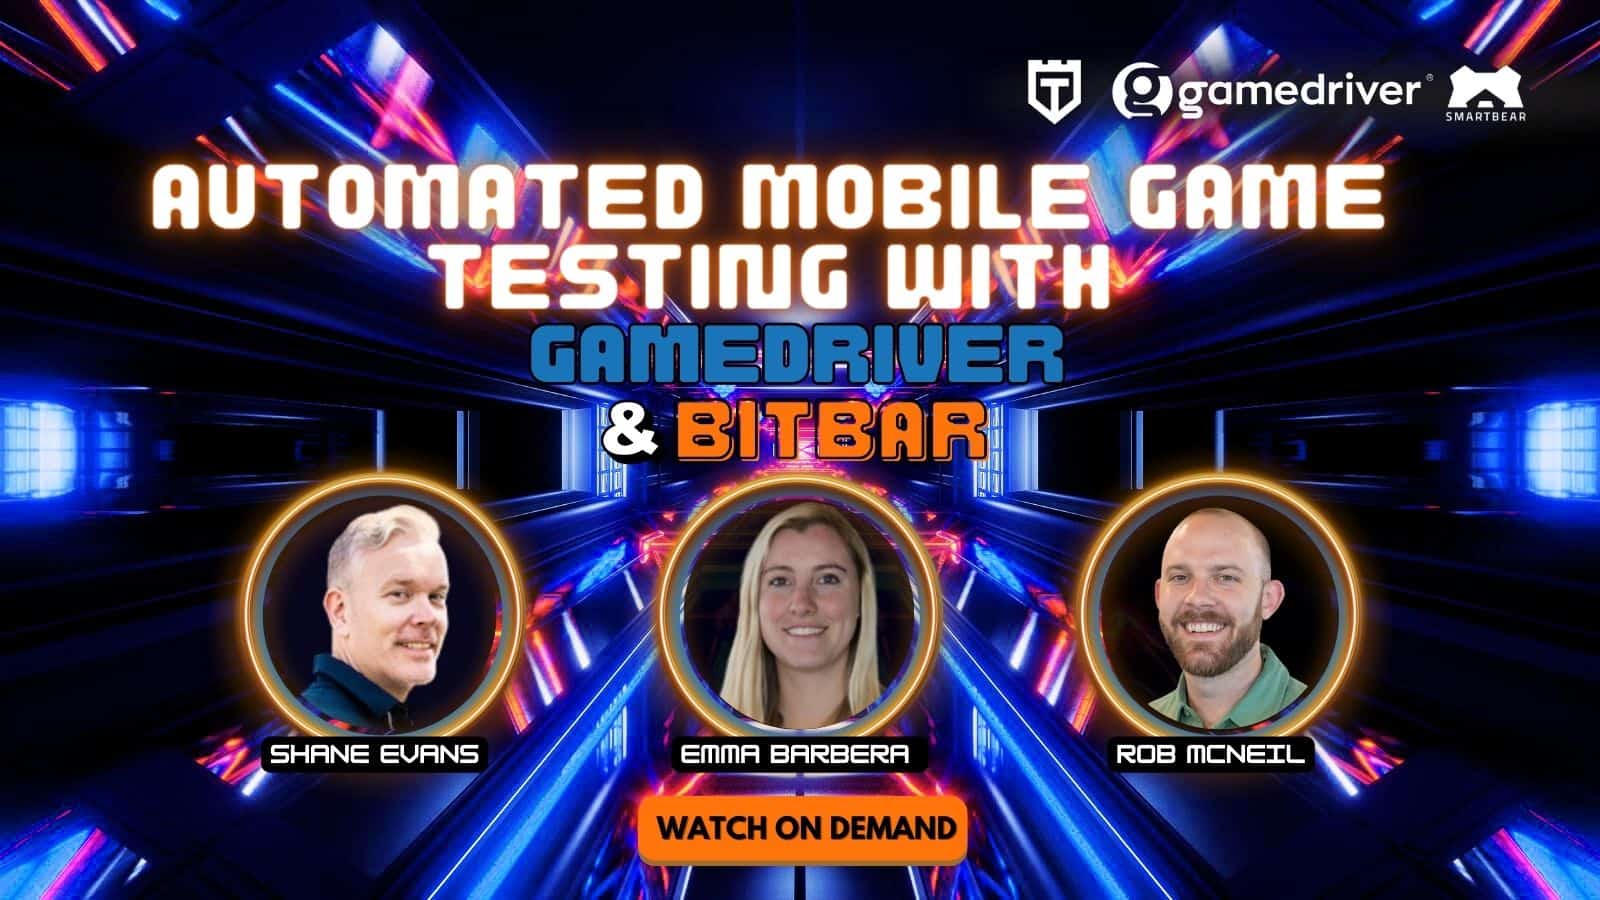 Promotional image for a webinar on automated mobile game testing, featuring speakers shane evans, emma barrera, and rob mcneil with a futuristic background.